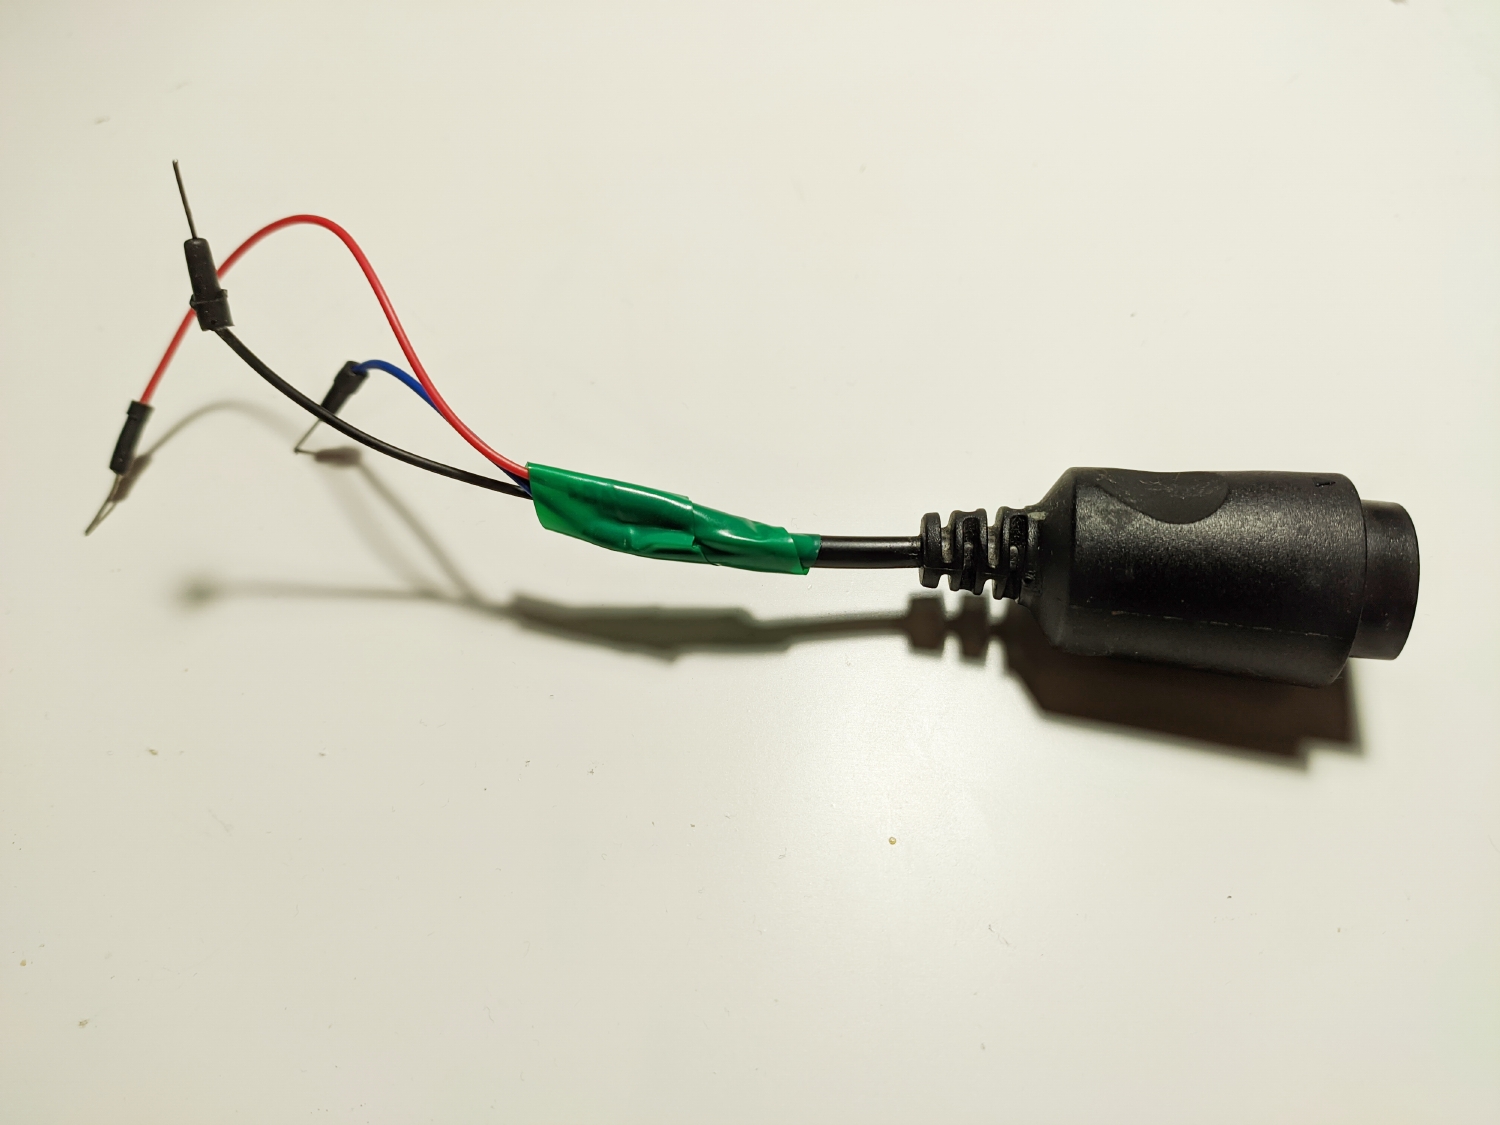 An example of a modified N64 cord